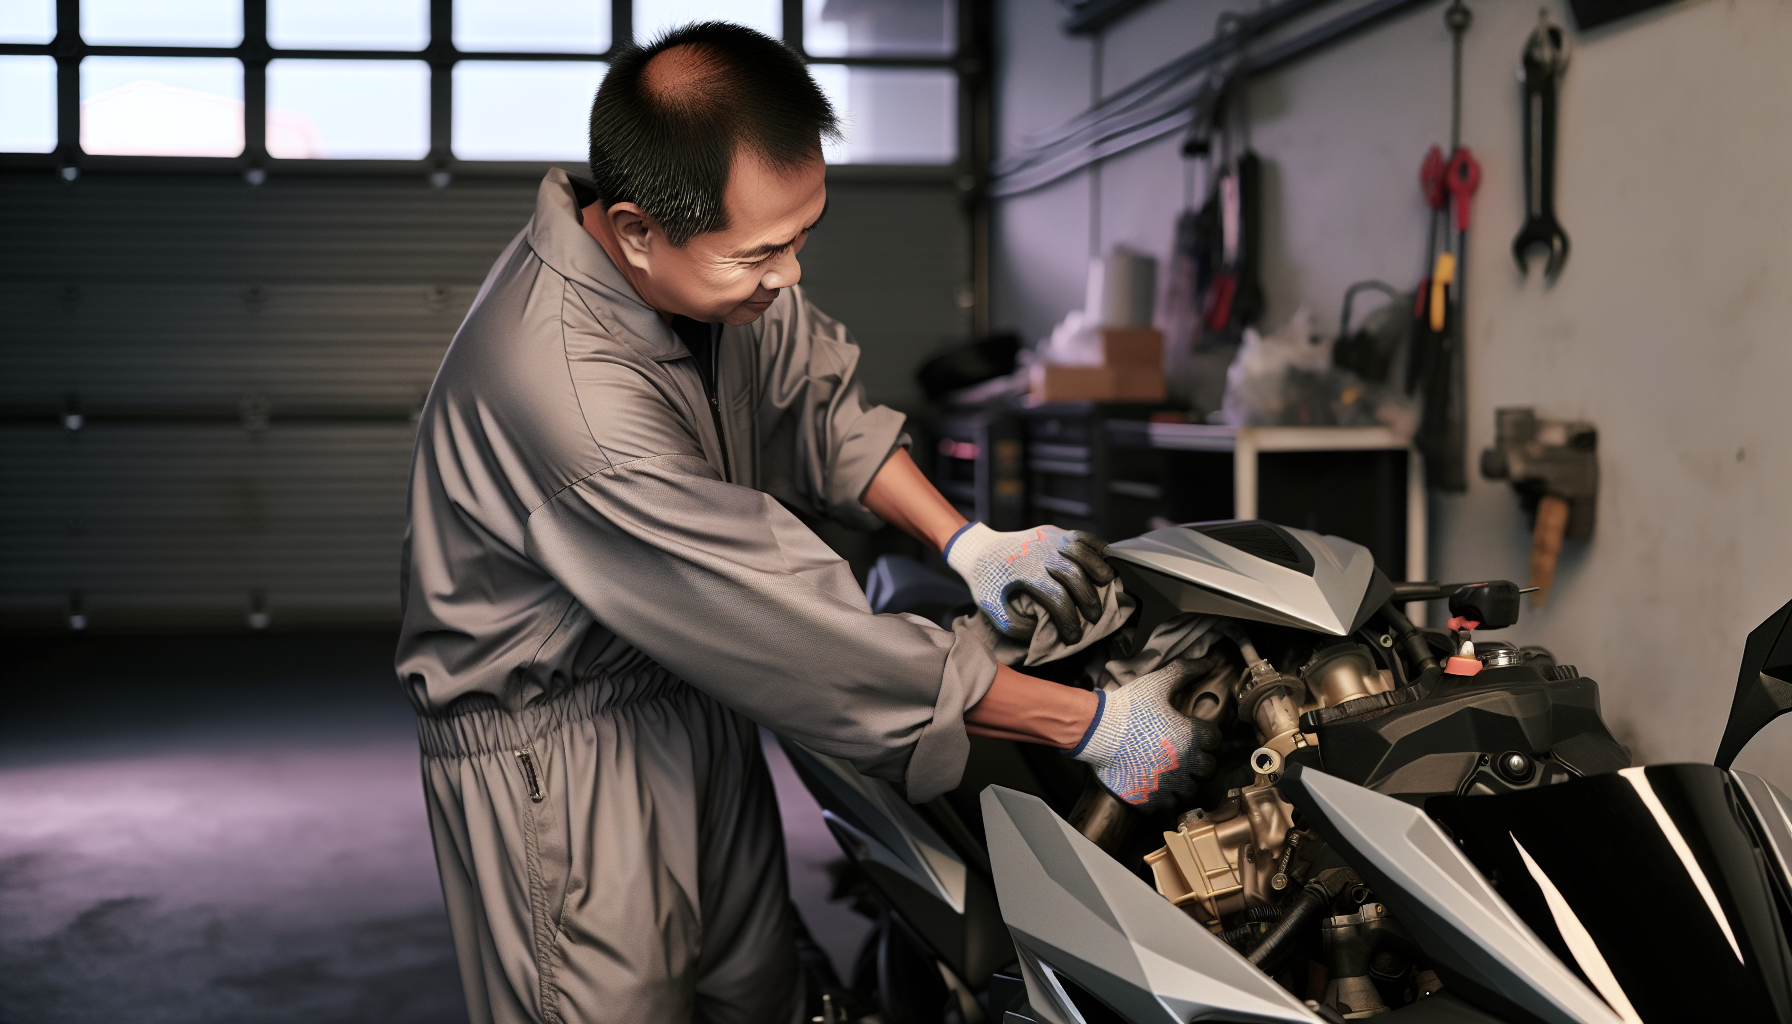 Mechanic performing routine maintenance on a powersports vehicle